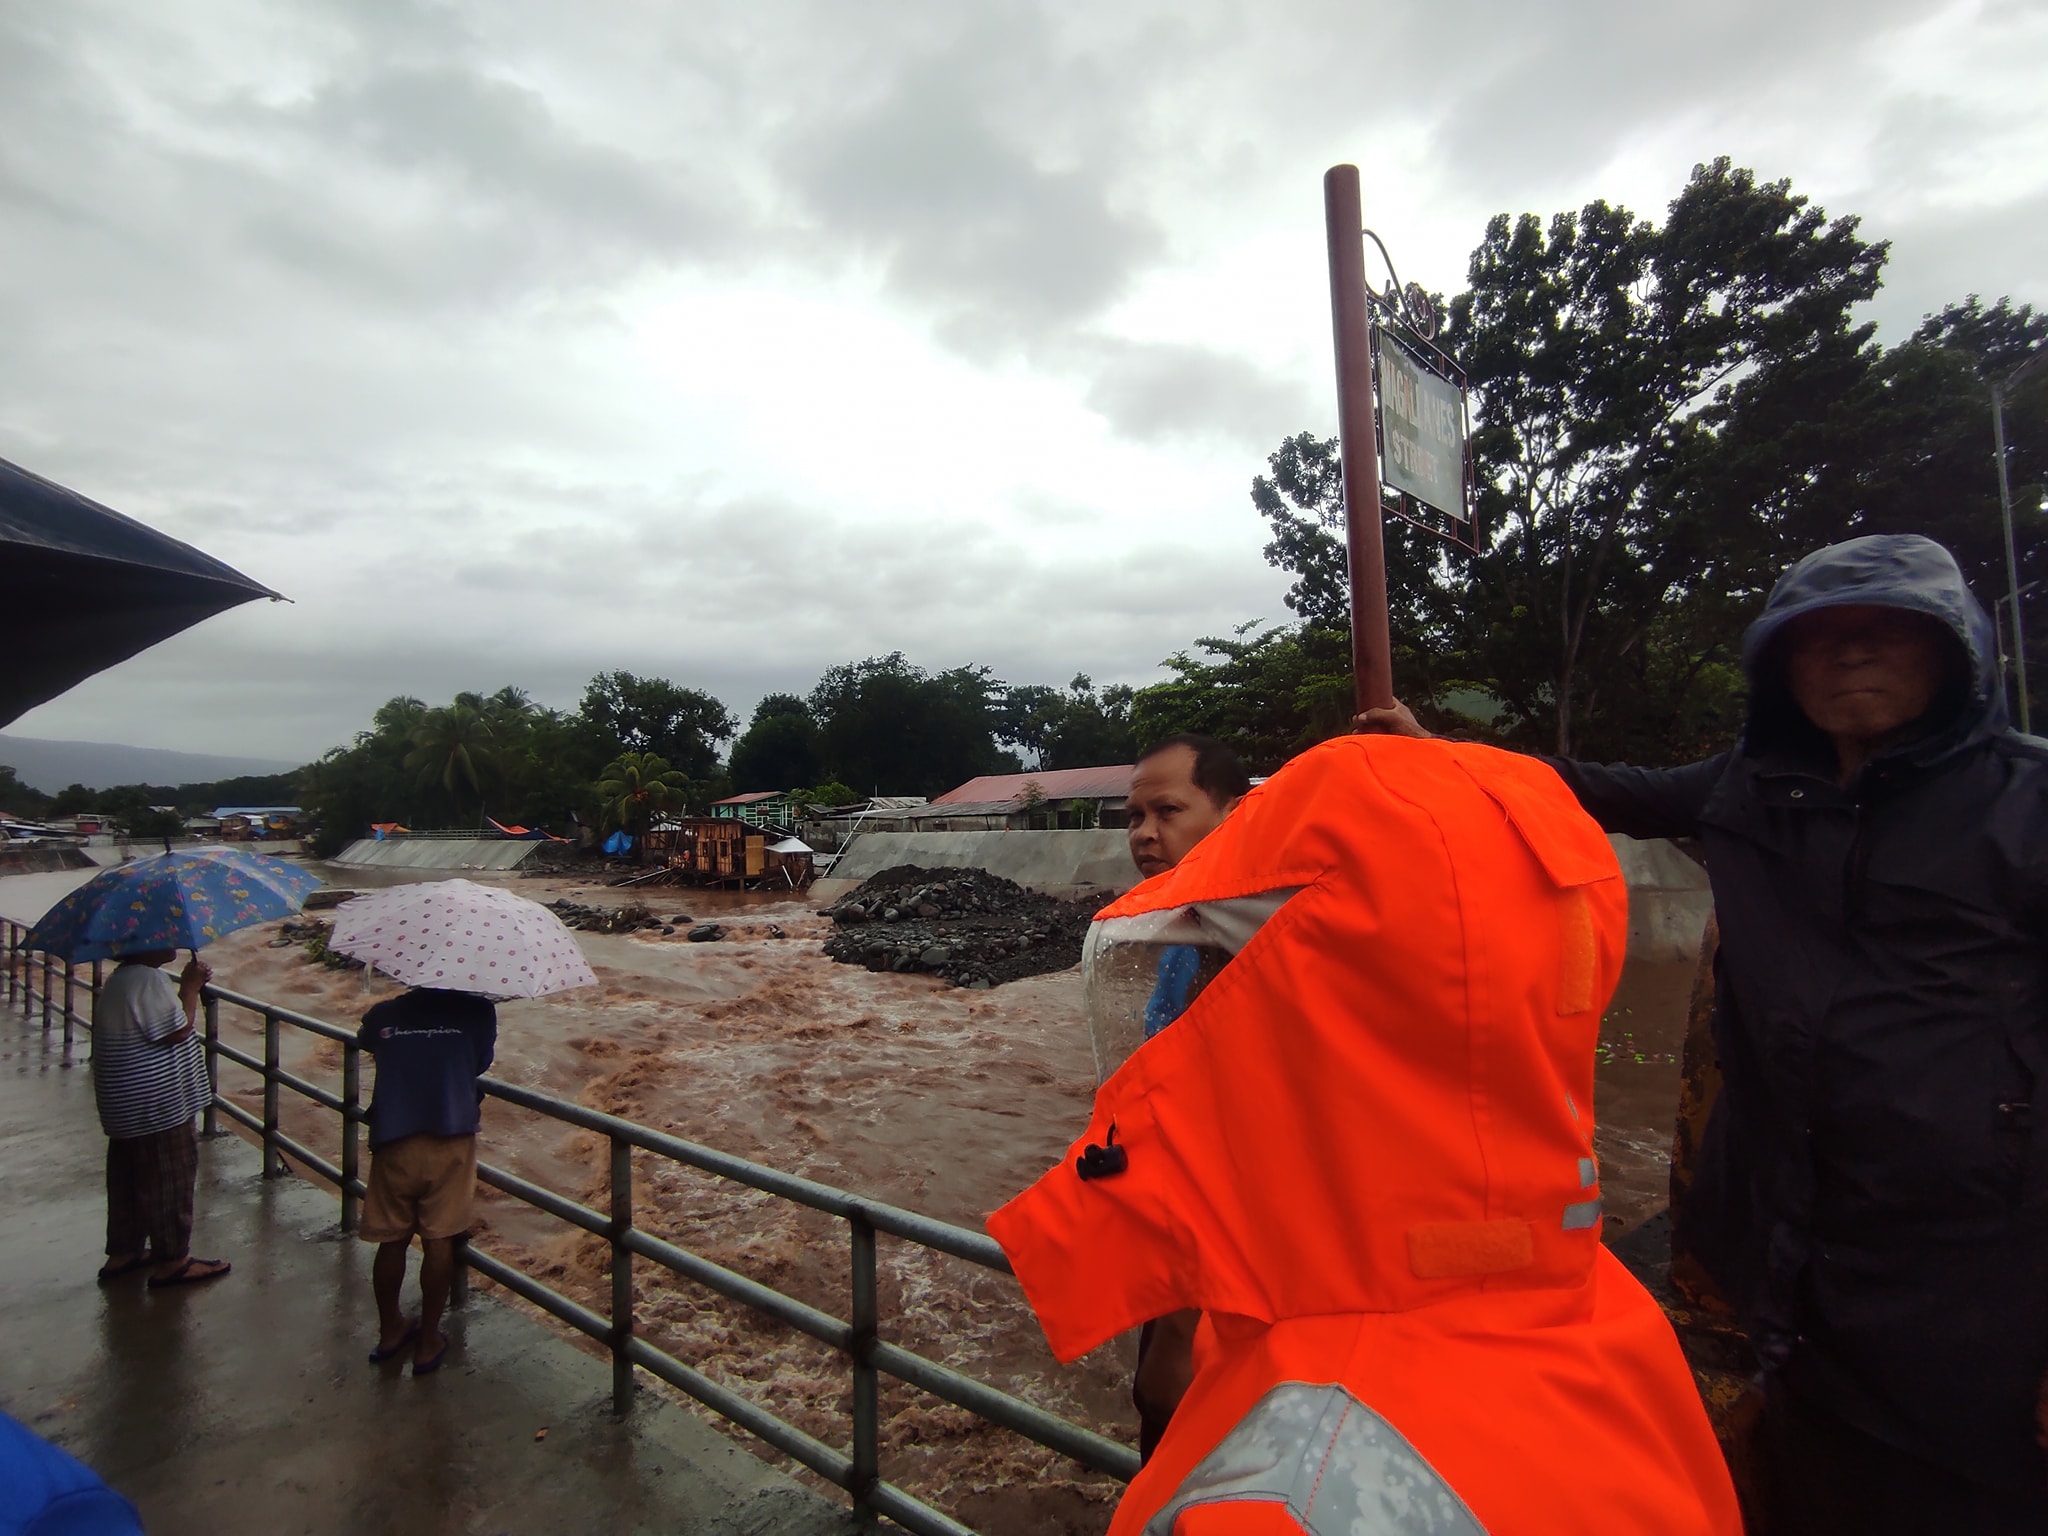 Cagayan de Oro readies for storm feared to hit exactly 10 years after ‘Sendong’